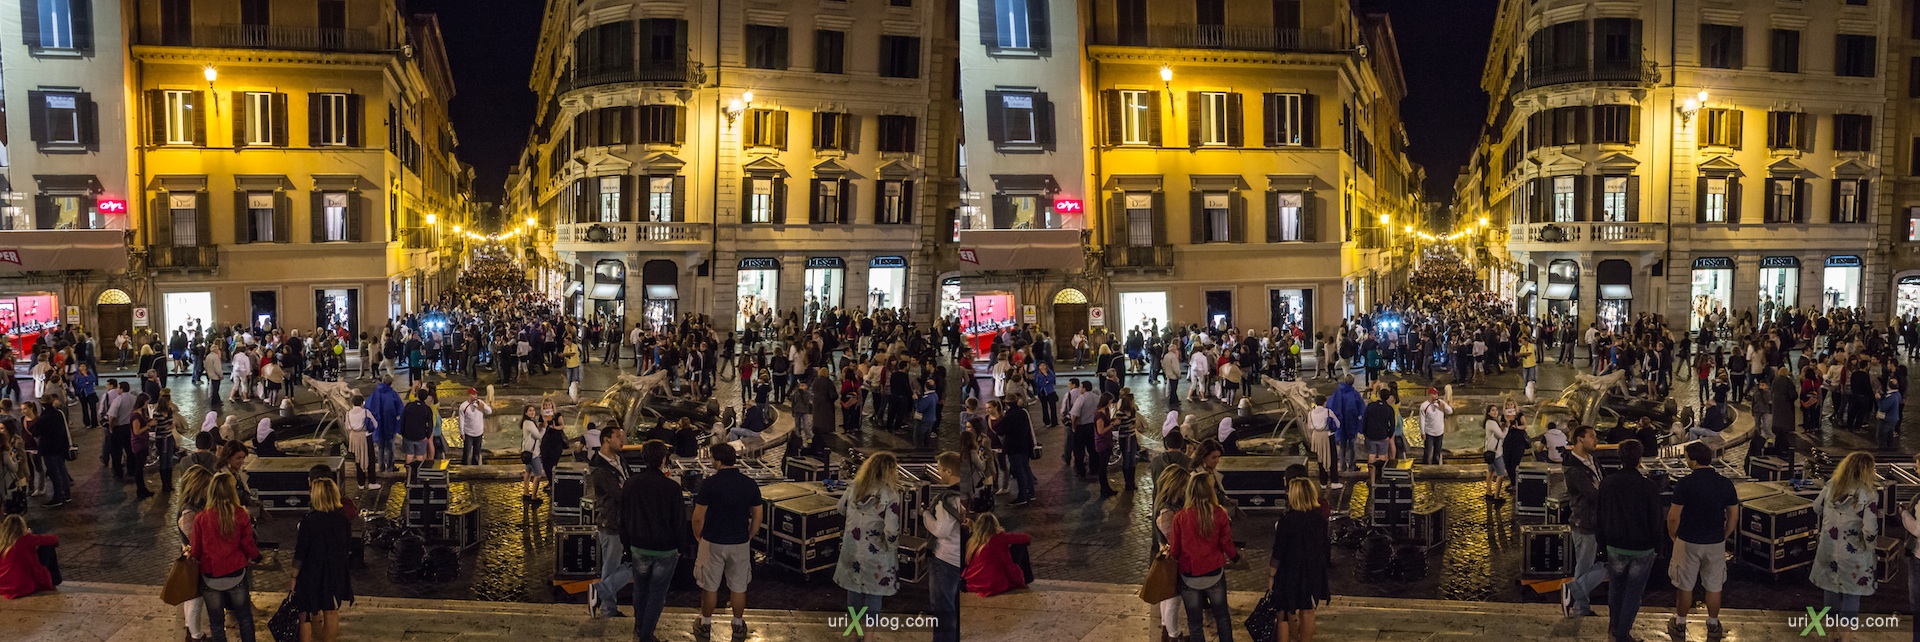 2012, Vogue Fashions Night Out, festival, Spanish square, Fountain of the Old Boat, via dei Condotti street, Rome, Italy, Europe, 3D, stereo pair, cross-eyed, crossview, cross view stereo pair